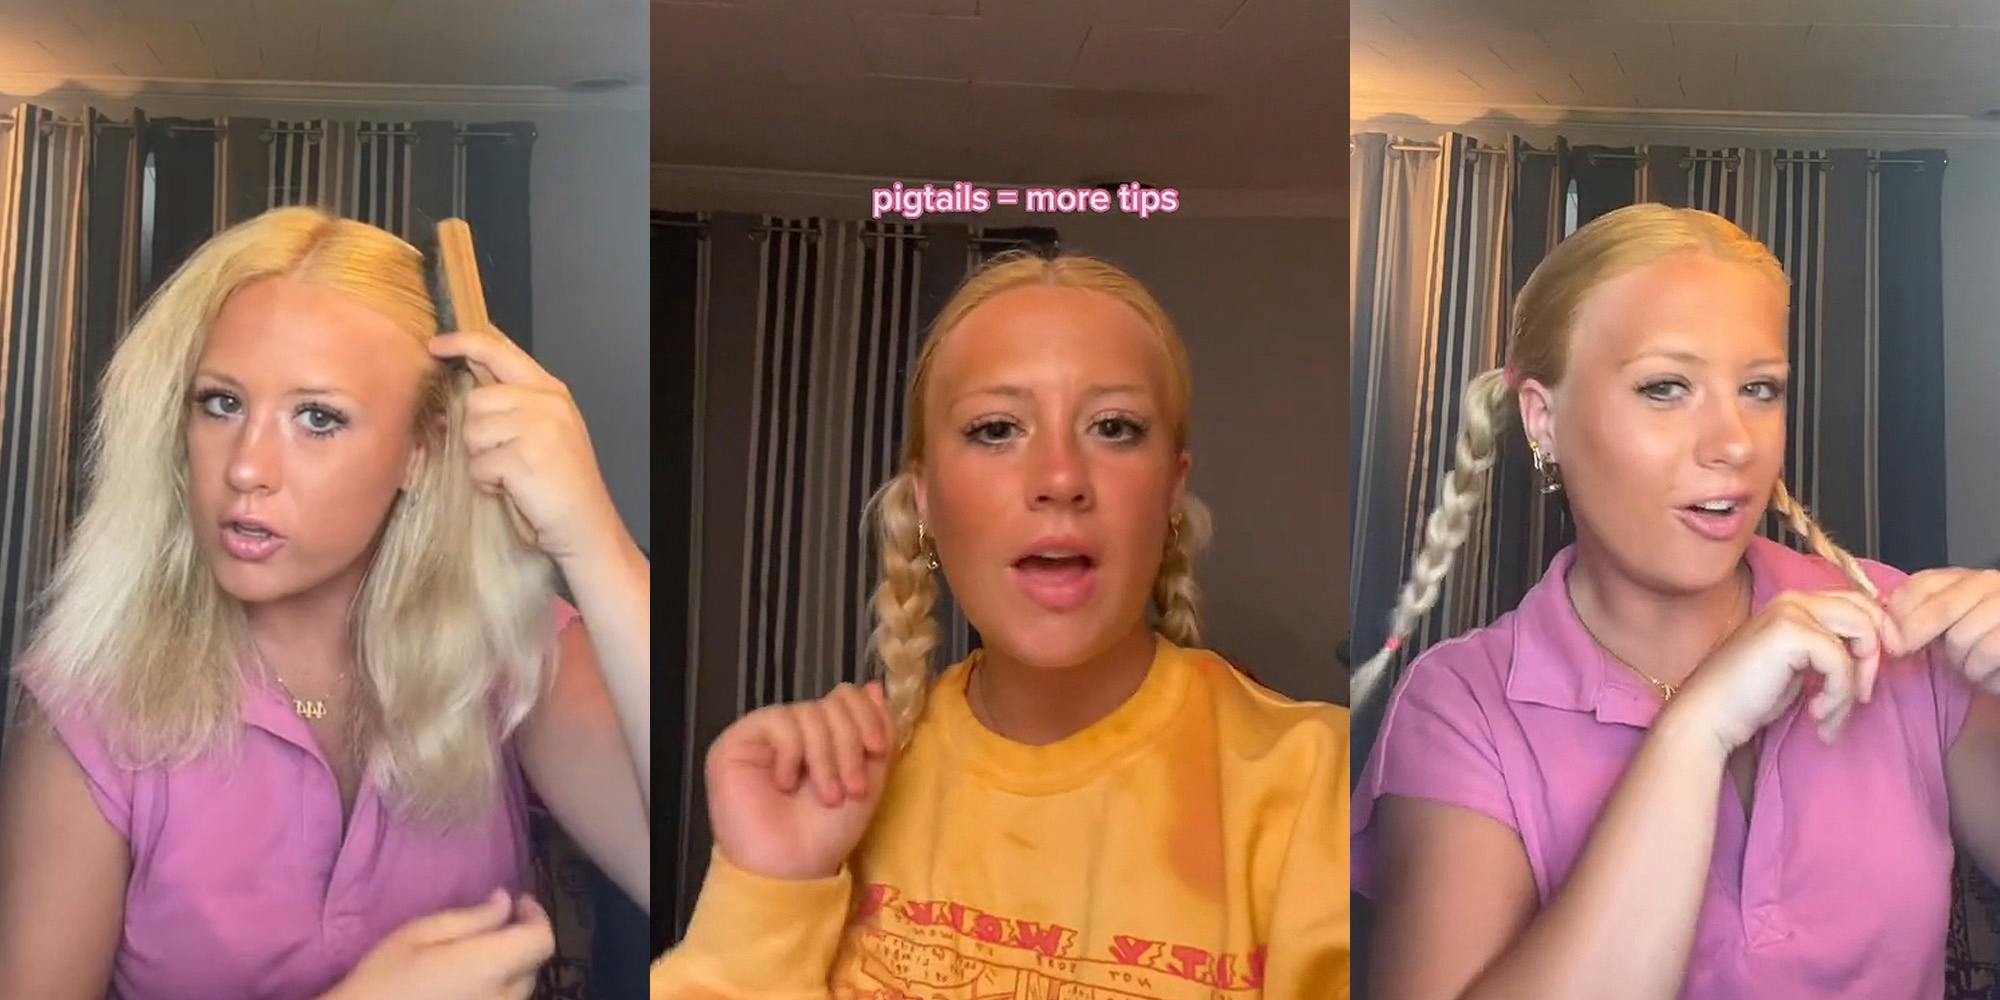 woman brushing hair (l) woman speaking caption "pigtails = more tips" (c) woman braiding pigtails (r)